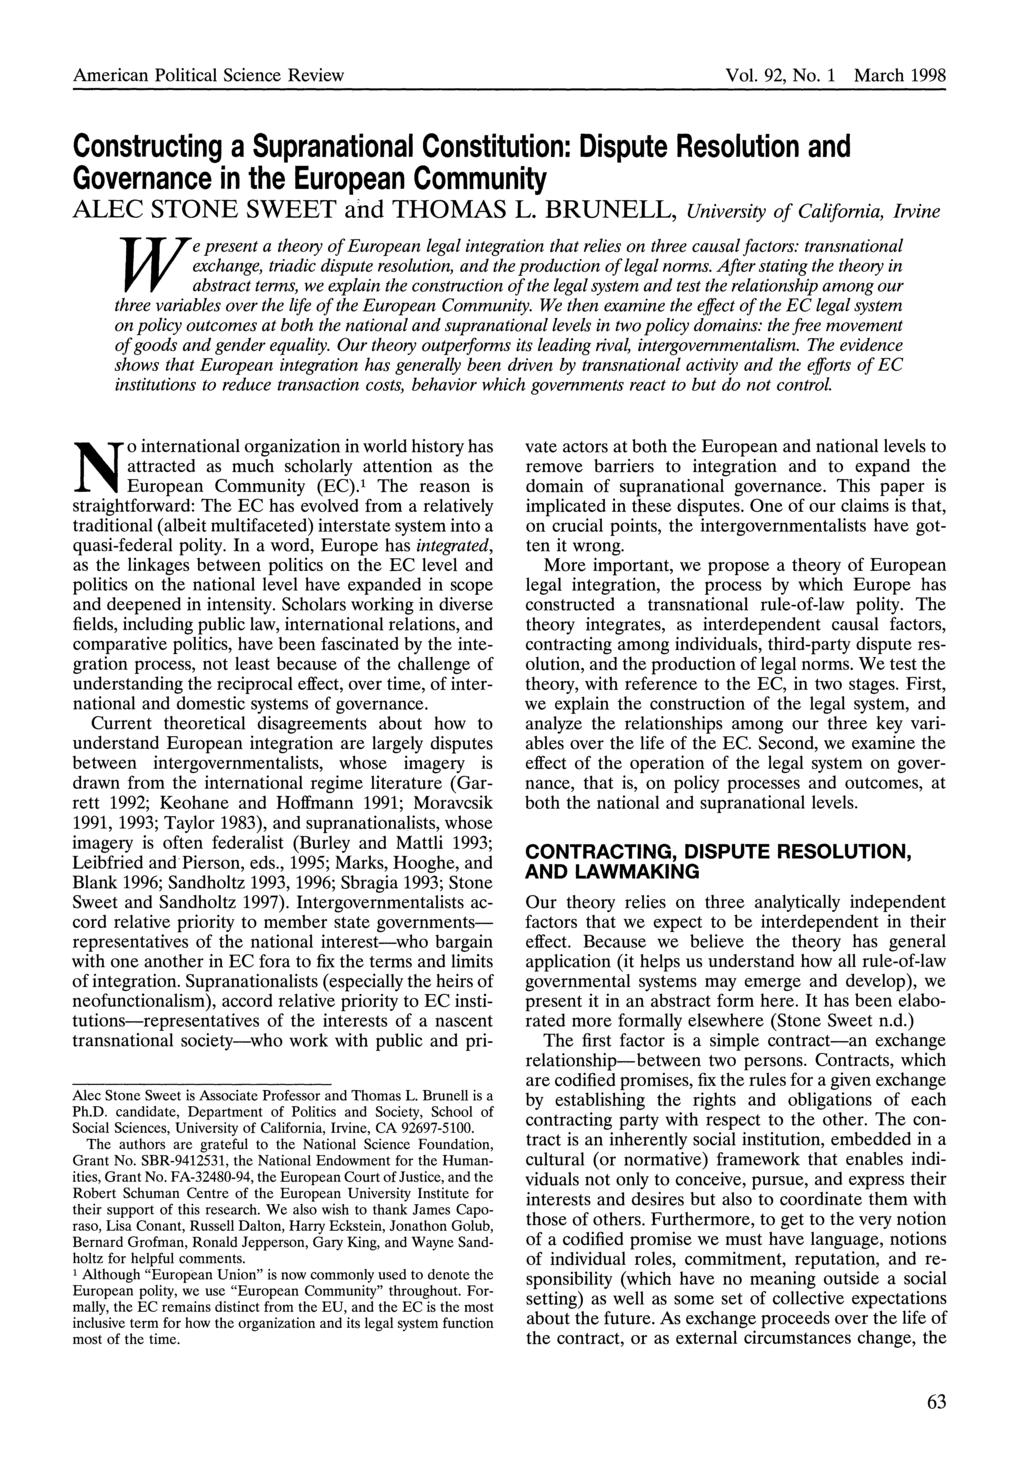 American Political Science Review Vol. 92, No. 1 March 1998 Constructing a Supranational Constitution: Dispute Resolution and Governance in the European Community ALEC STONE SWEET and THOMAS L.